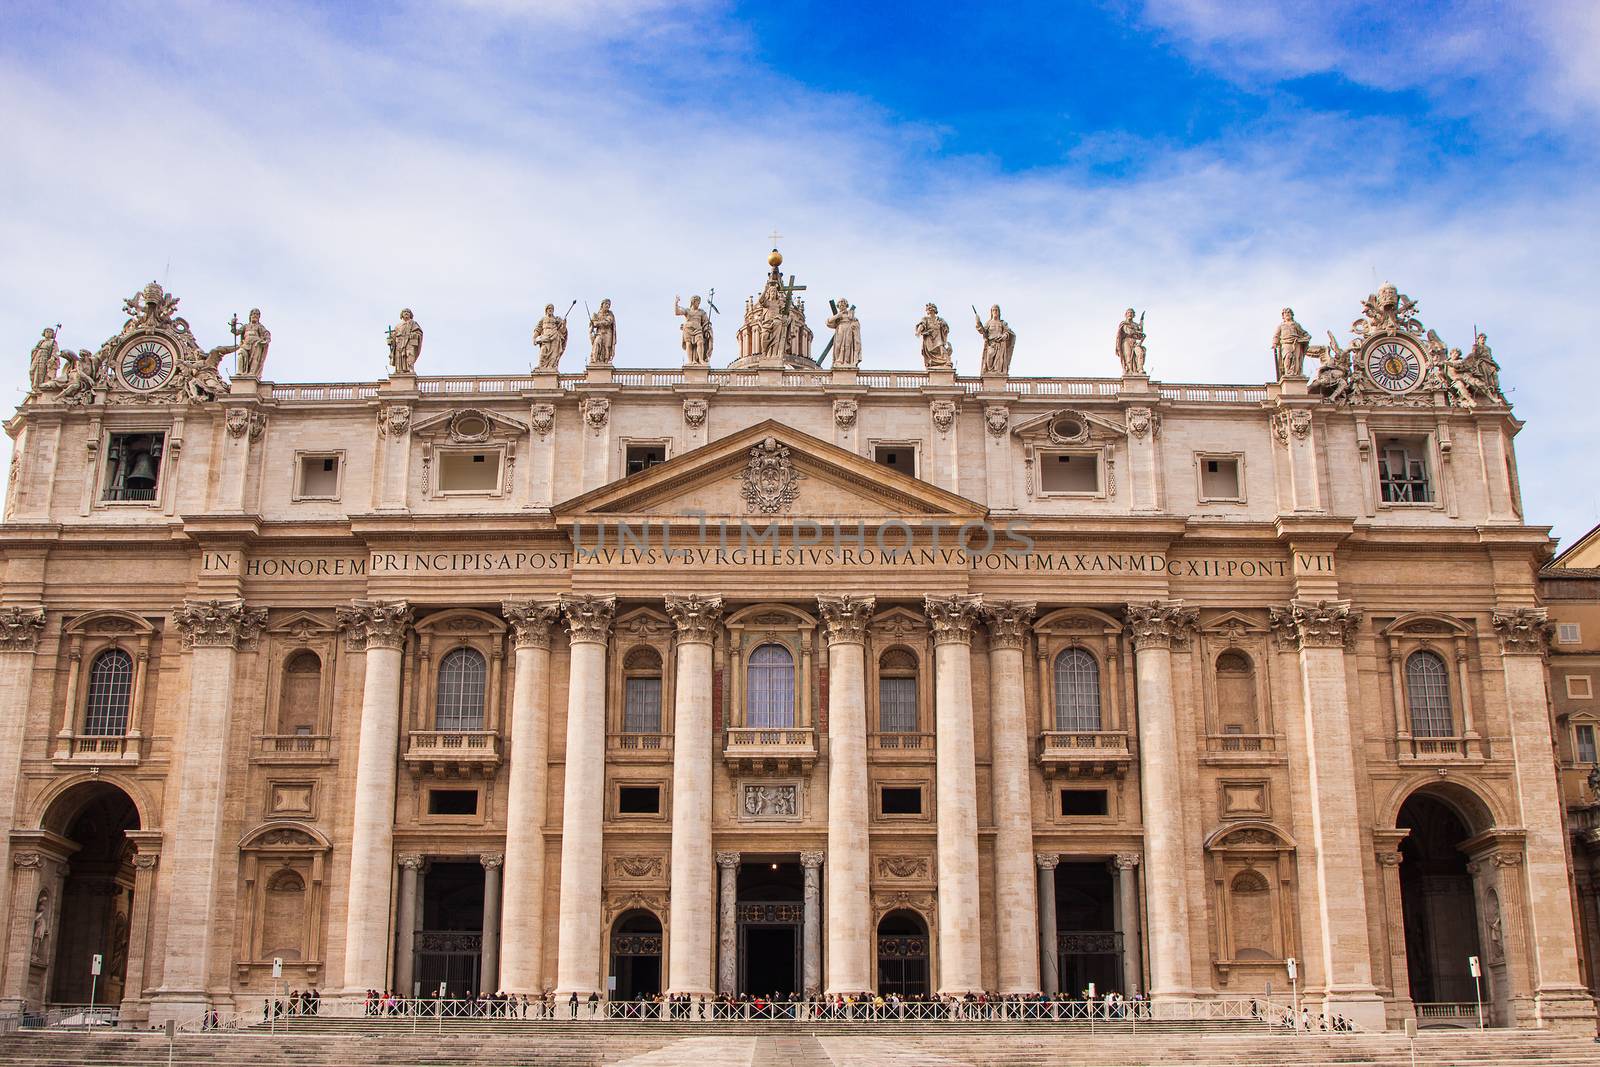 St. Peter's Basilica in Vatican City in Rome, Italy. by bloodua